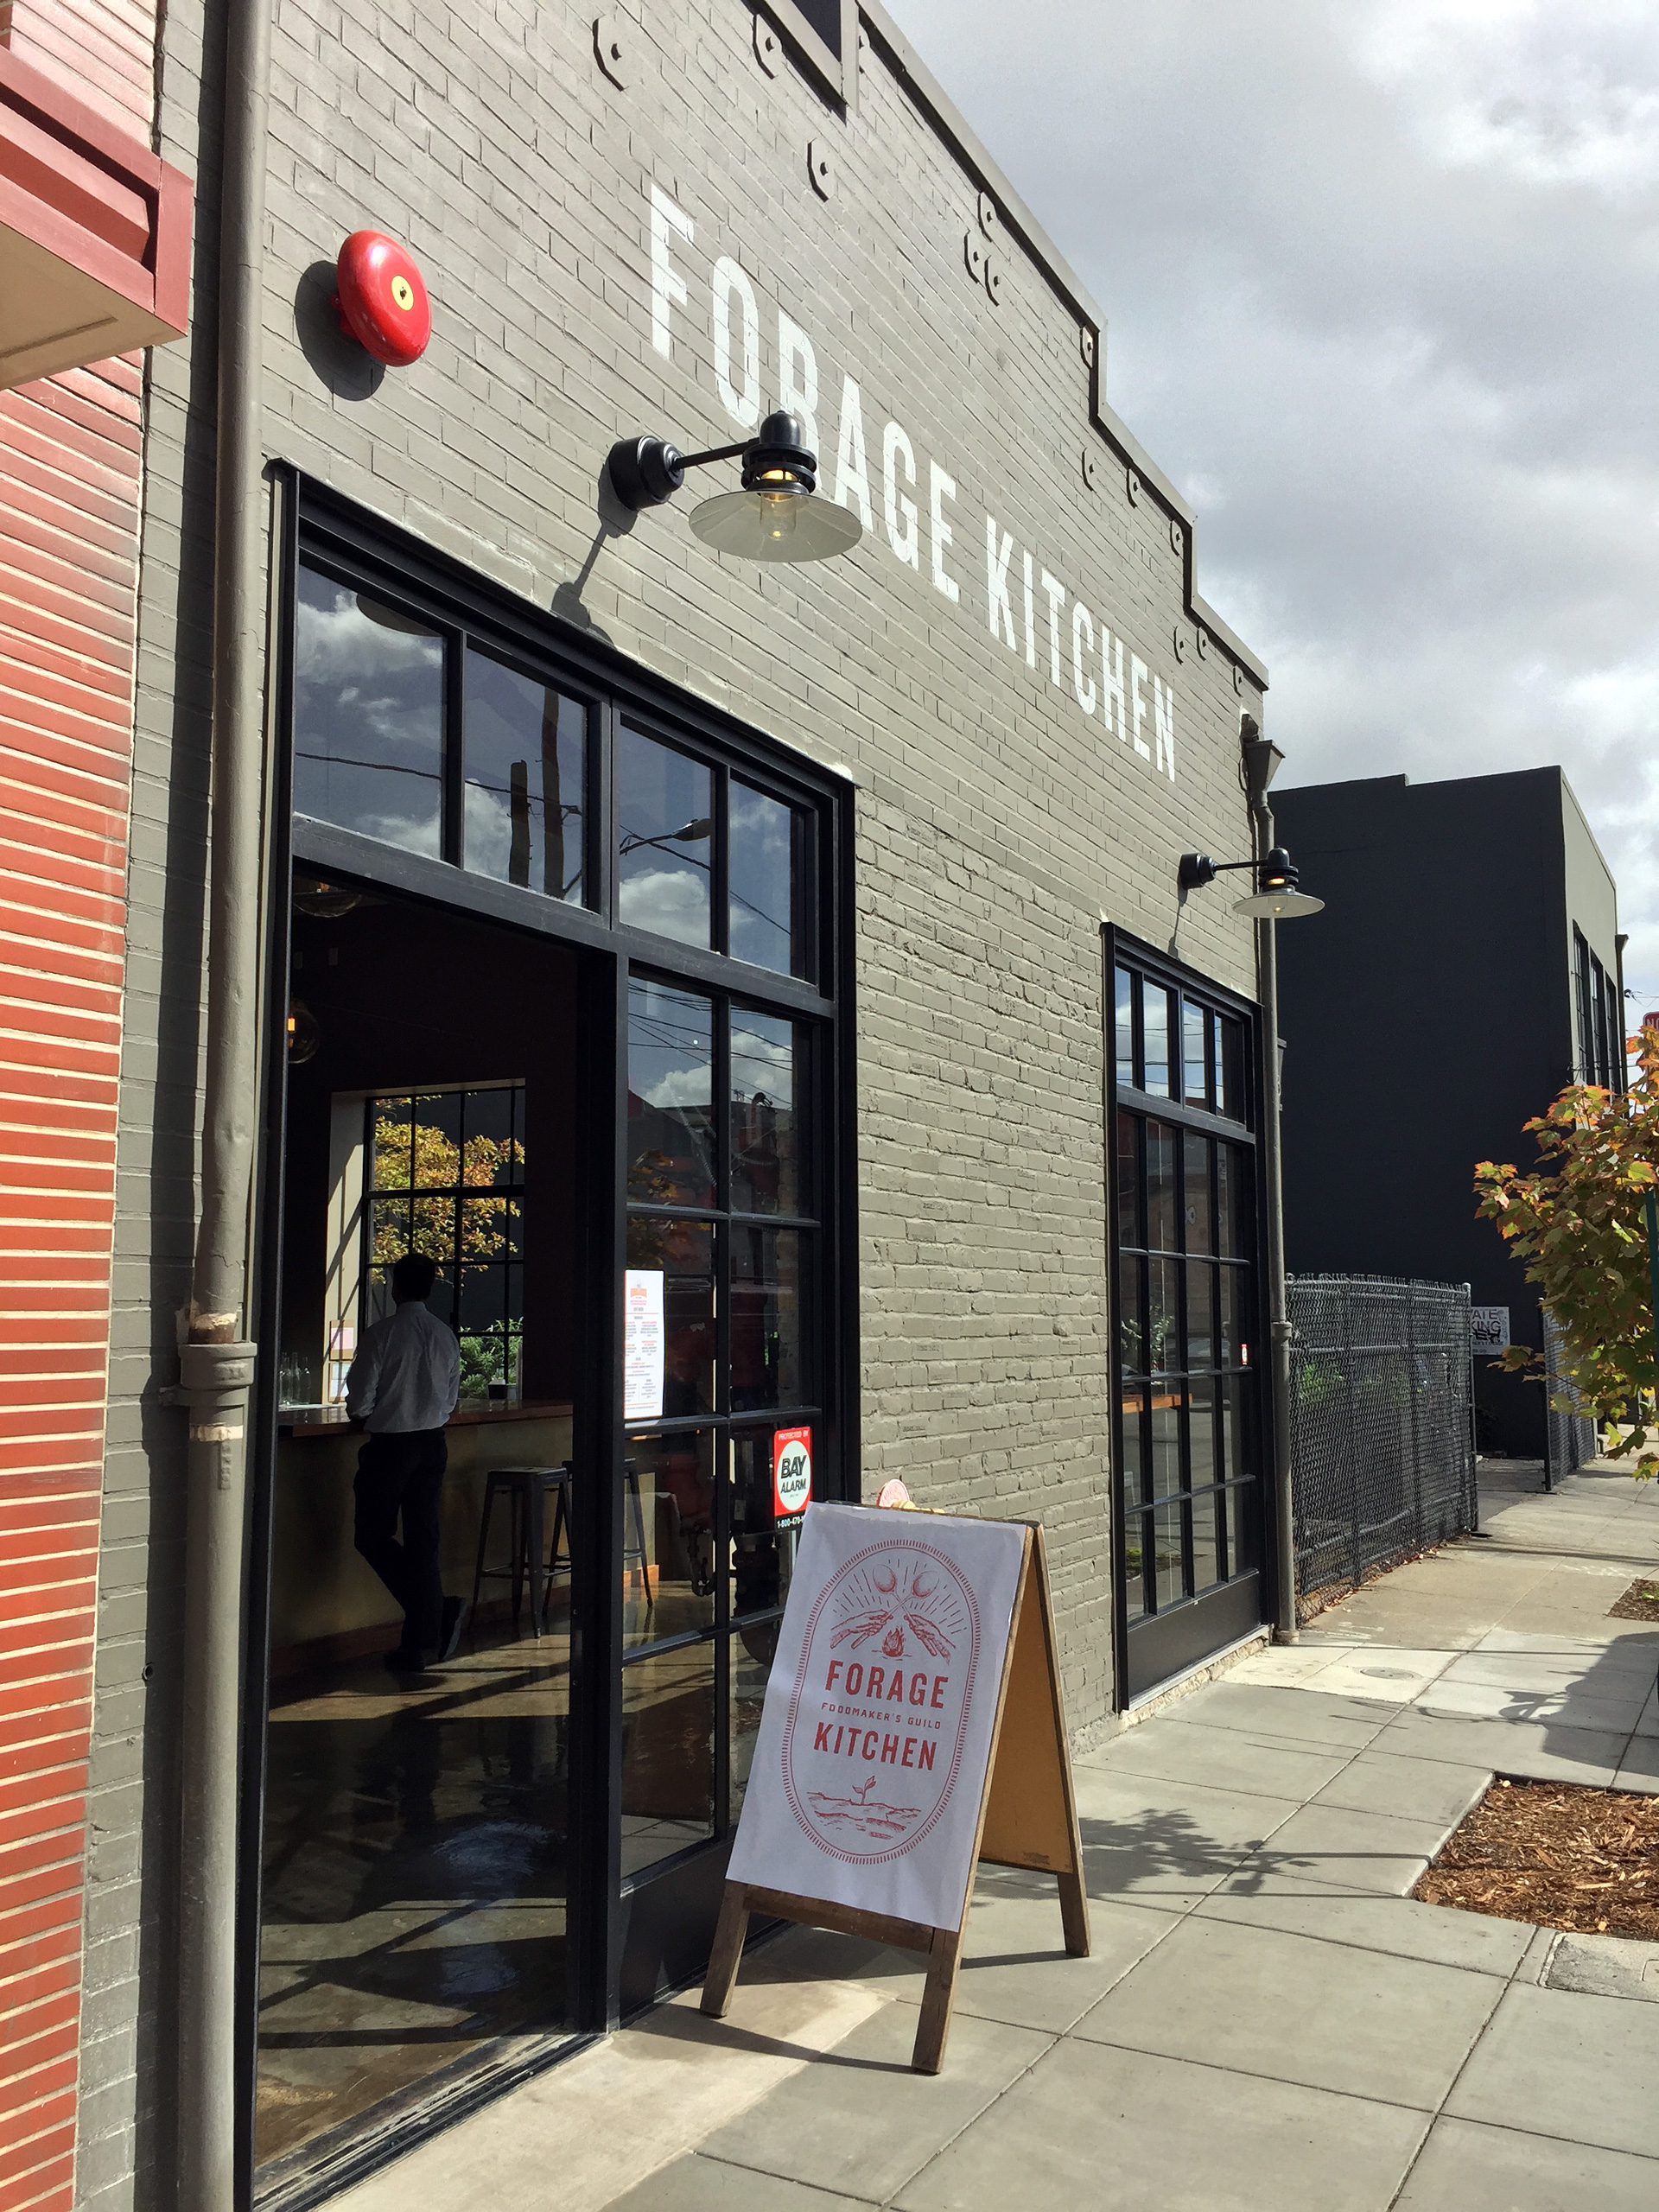 Forage Kitchen, a shared commercial kitchen space on 25th St. in Oakland